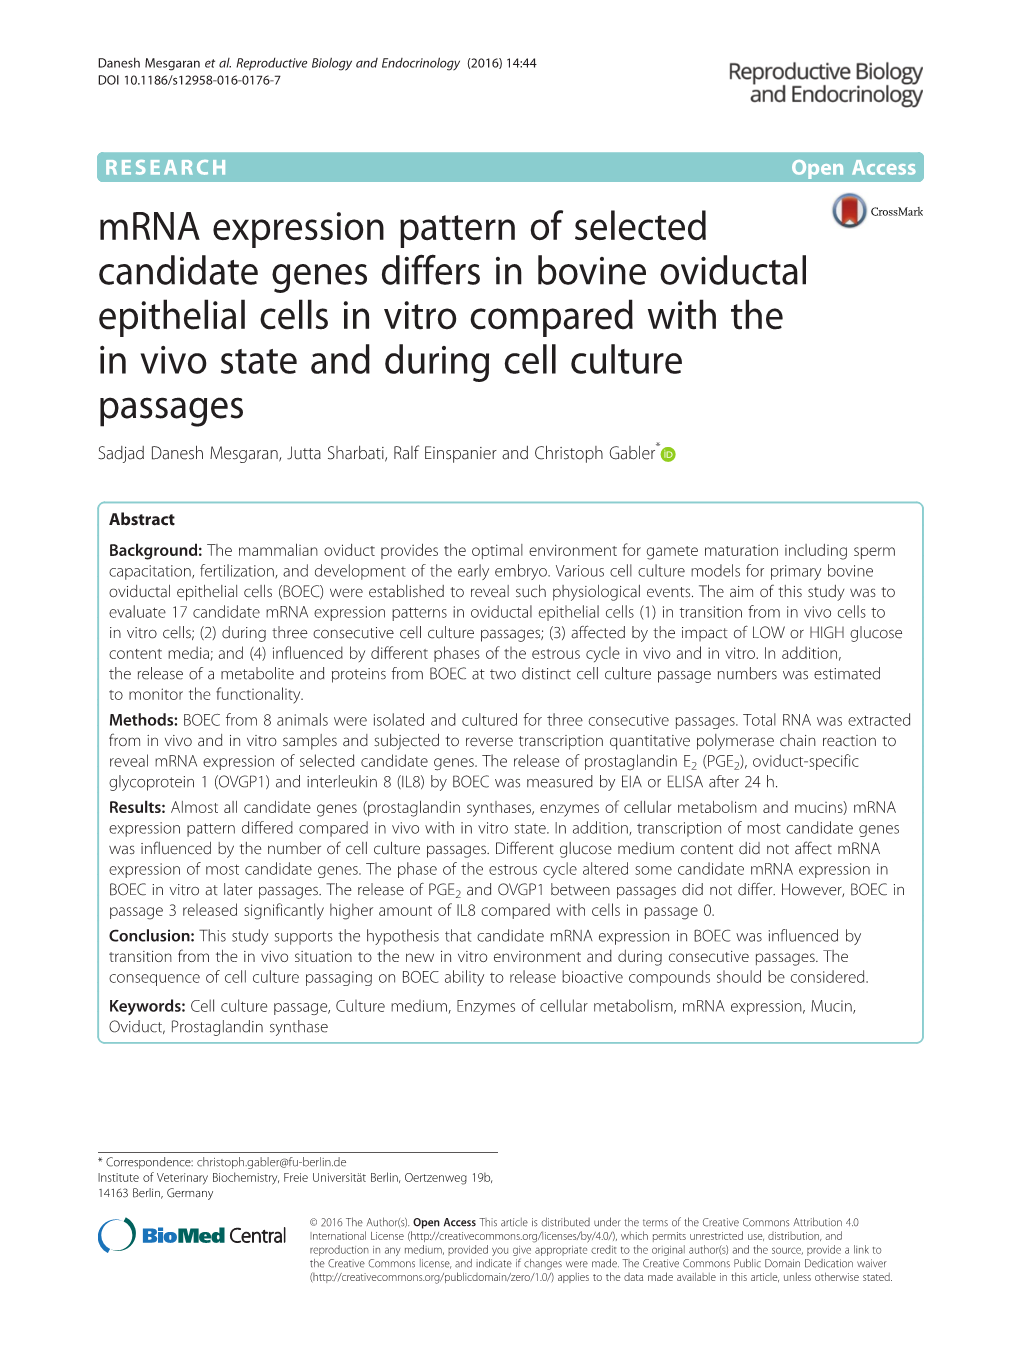 Mrna Expression Pattern of Selected Candidate Genes Differs in Bovine Oviductal Epithelial Cells in Vitro Compared with the in V